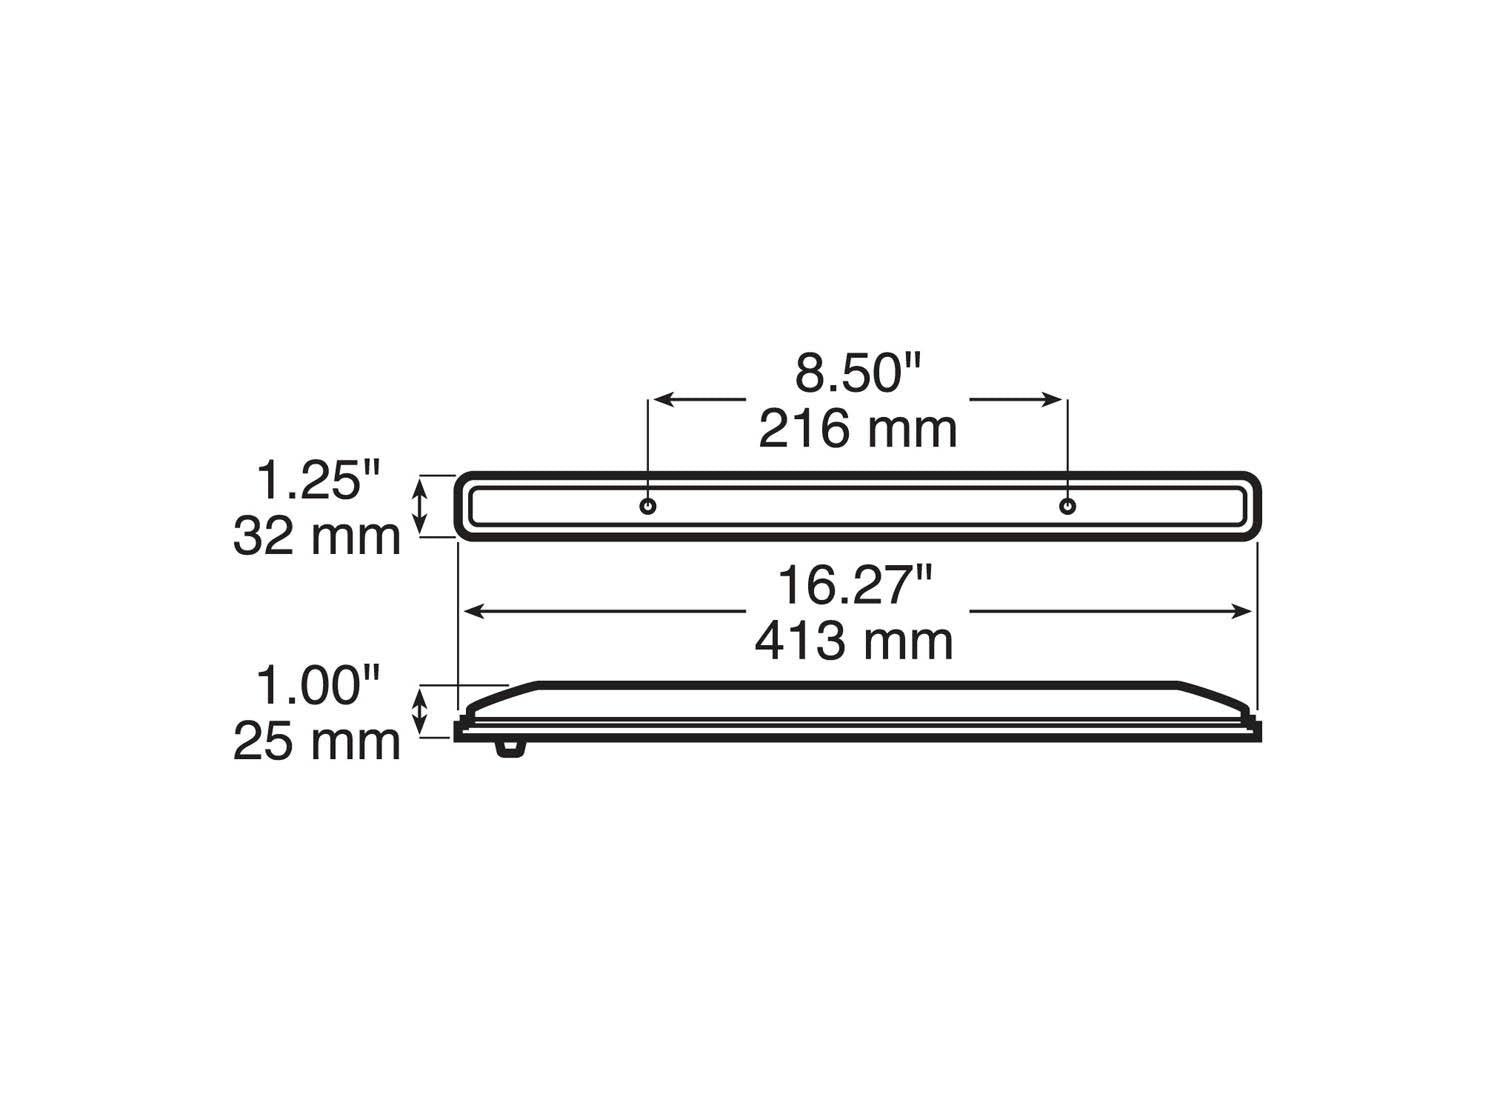 LED ID Bar, Rectangular, w/one .180 Bullet 16.27"X1.25", red, bulk pack (Pack of 100) - 169-3_line_dual_2view-BX5_87a90c72-60ba-47f9-8a21-e1eedef95ce2